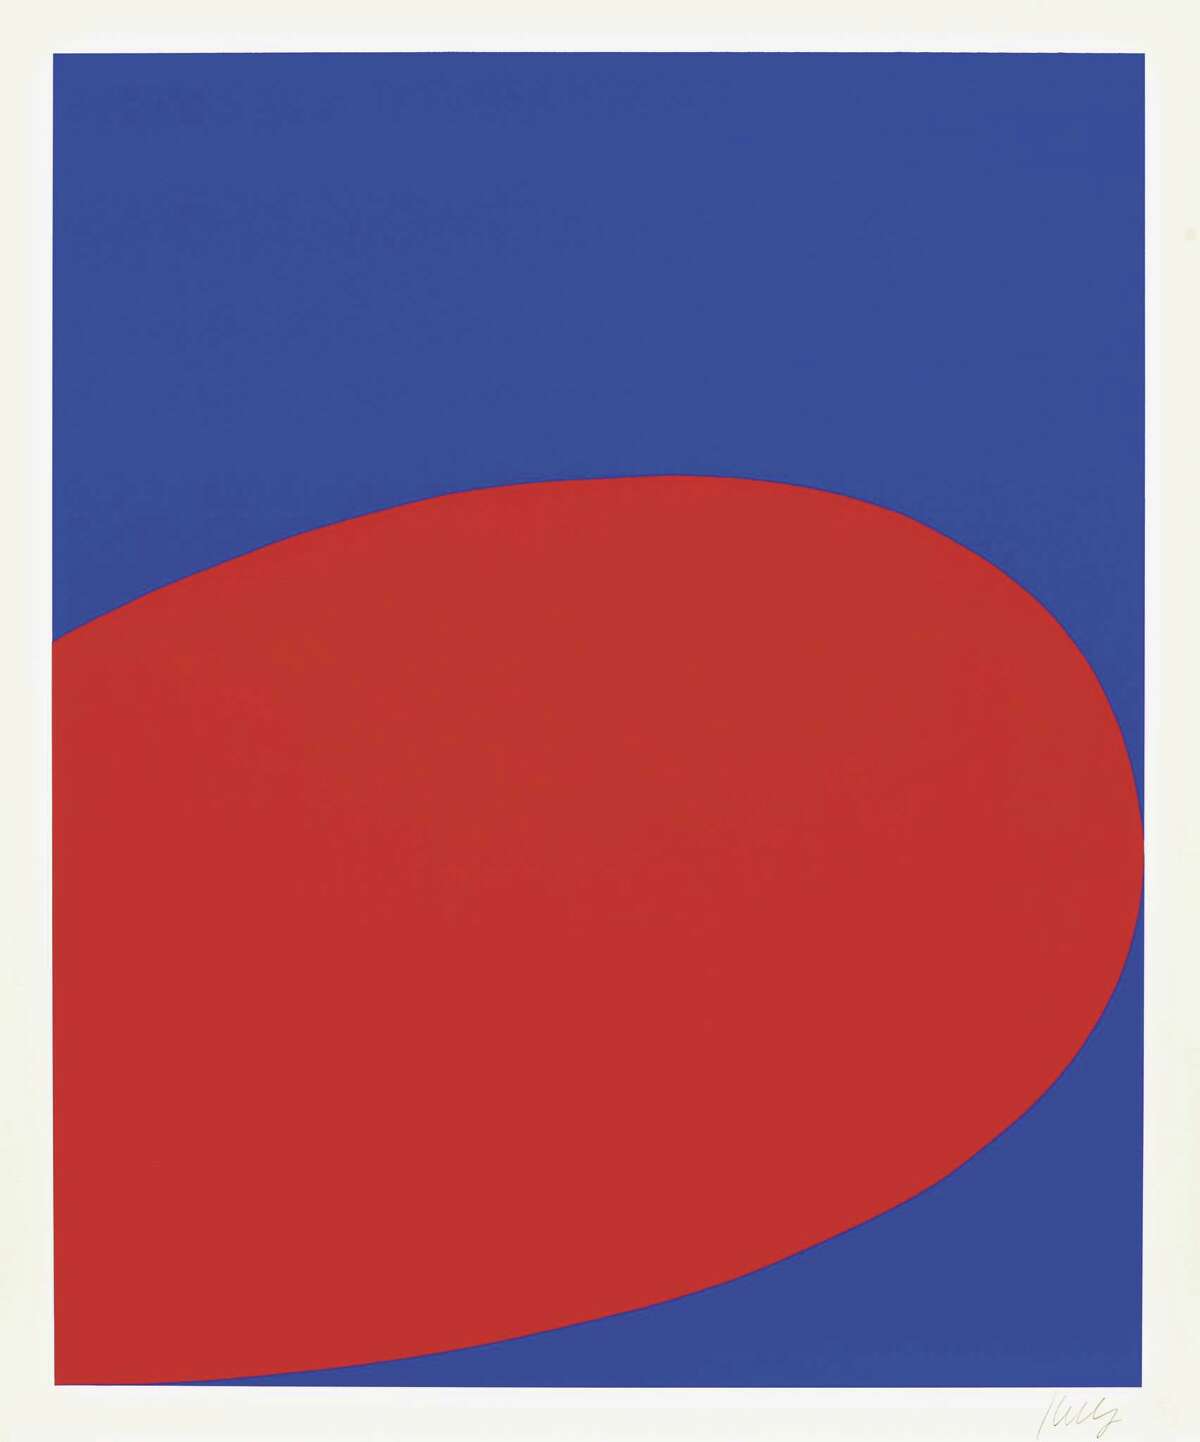 Red Blue (Untitled) (Axsom 2), from the portfolio Ten Works x Ten Painters, 1964 Screenprint, 24 x 20 inches